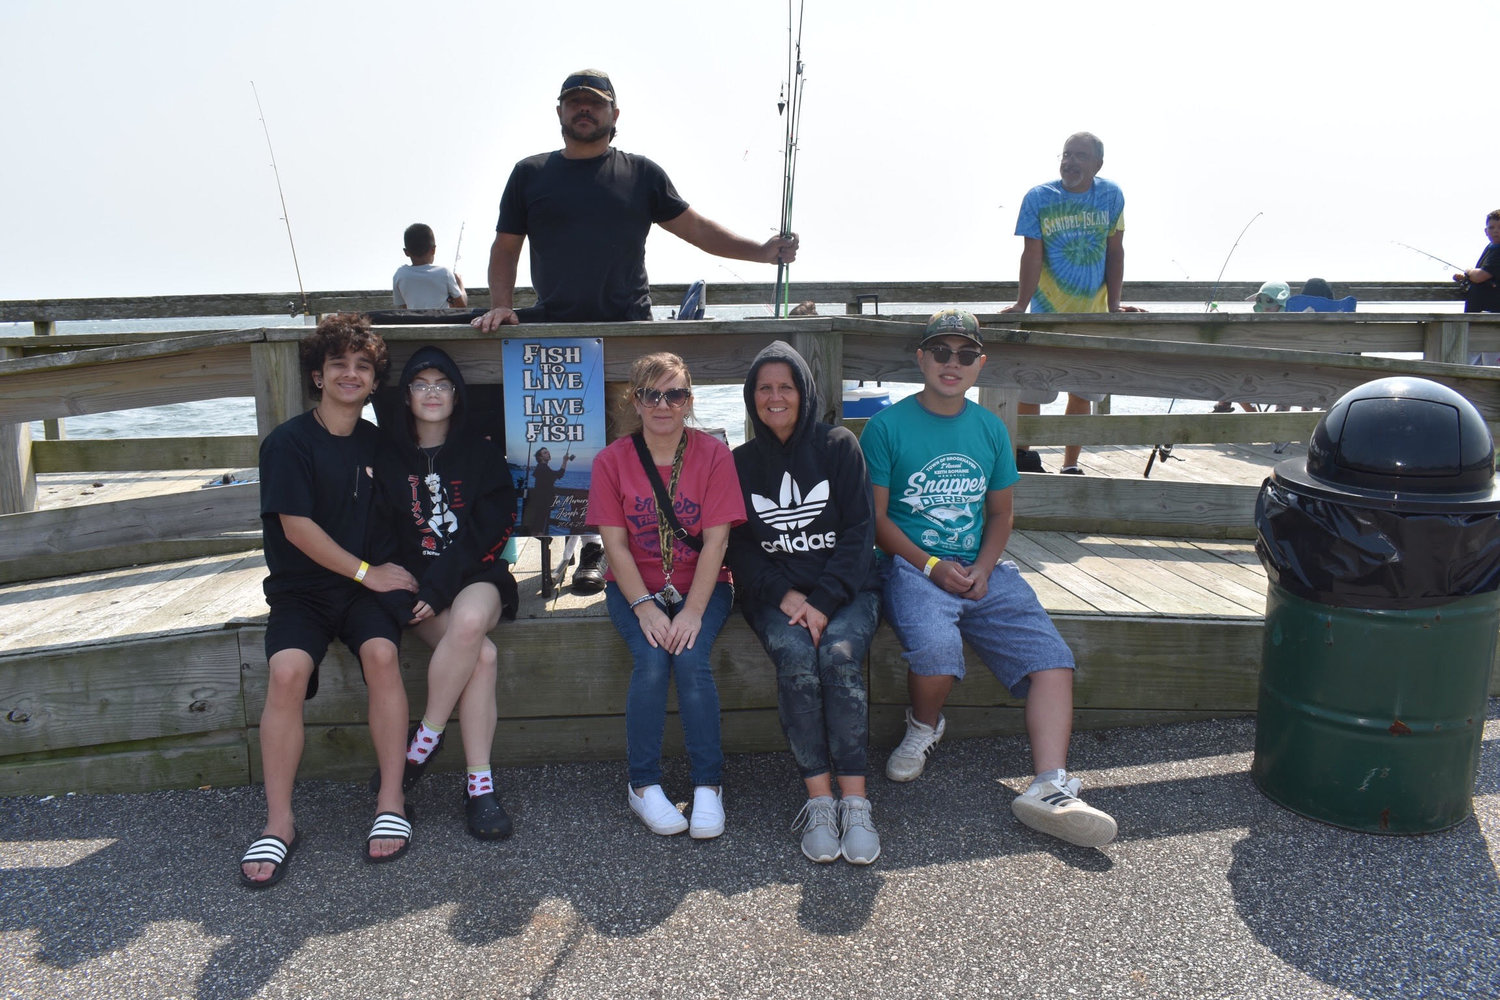 Joseph Rera’s family and friends gathered in front of his memorial plaque. His mother, Erin Rera, said Joseph was an avid fisherman who loved to spend his time with friends at the Union Avenue dock. Pictured is (in back) Derek Rera; (left to right) Frankie Villani; Alexa Rera; Erin Rera; Denise Trionfo; and Joseph Trionfo.